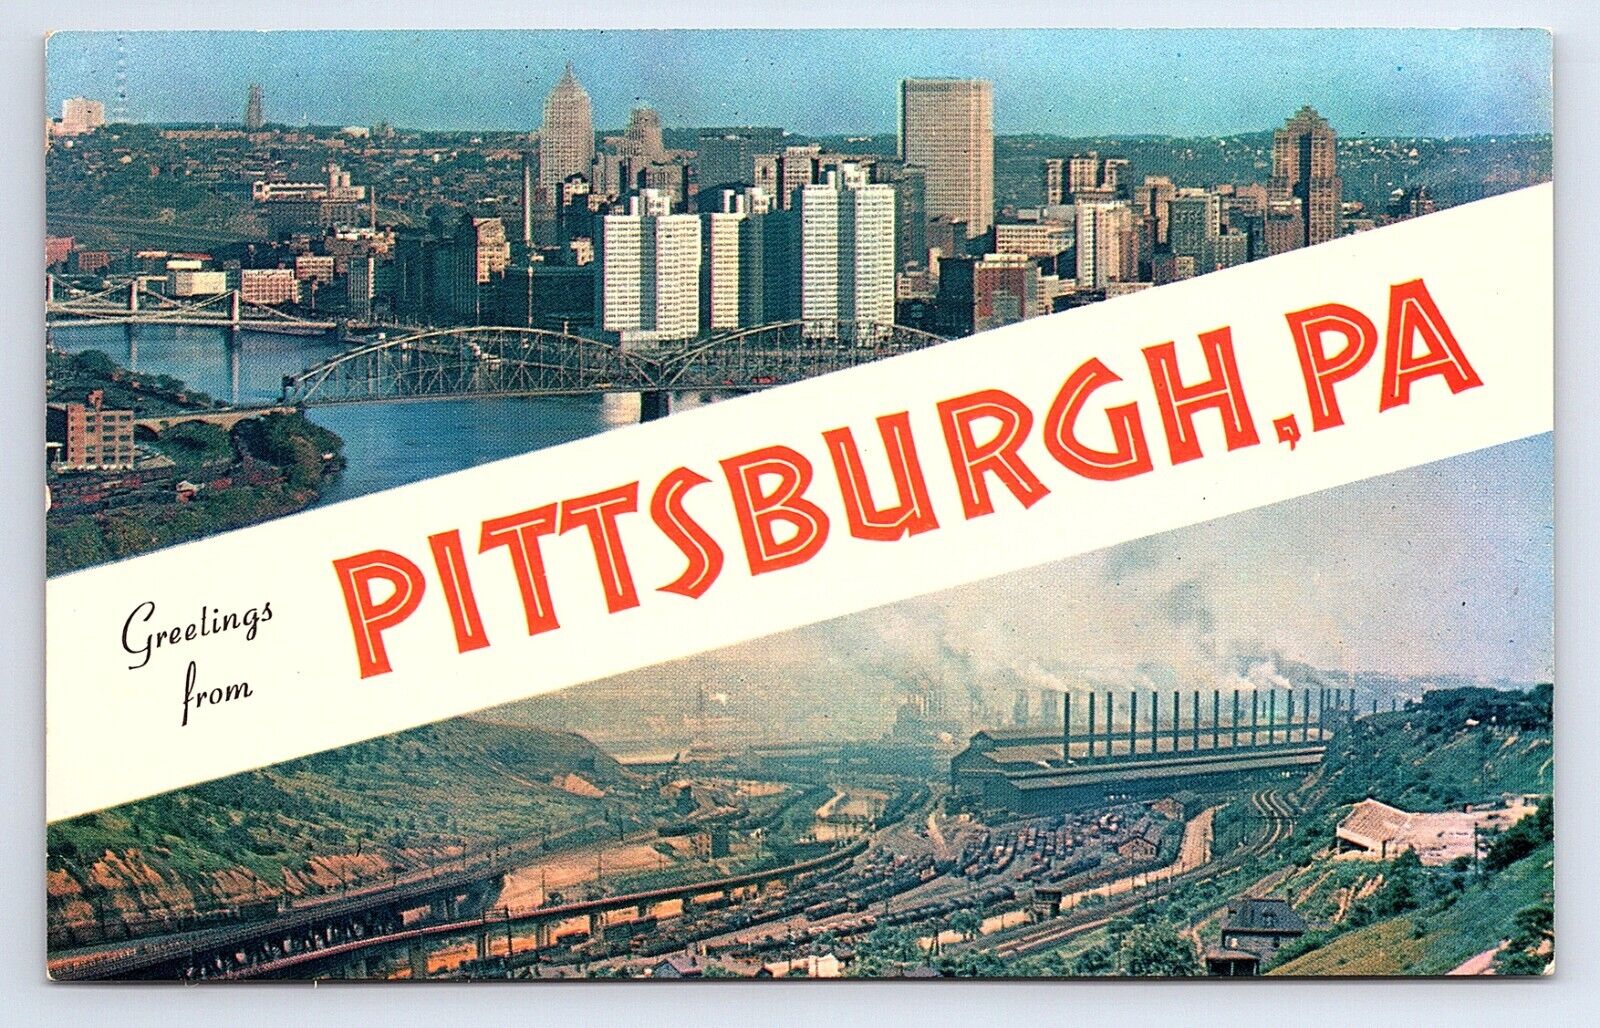 Postcard Greetings From Pittsburgh PA Multi-view Banner Large Letter